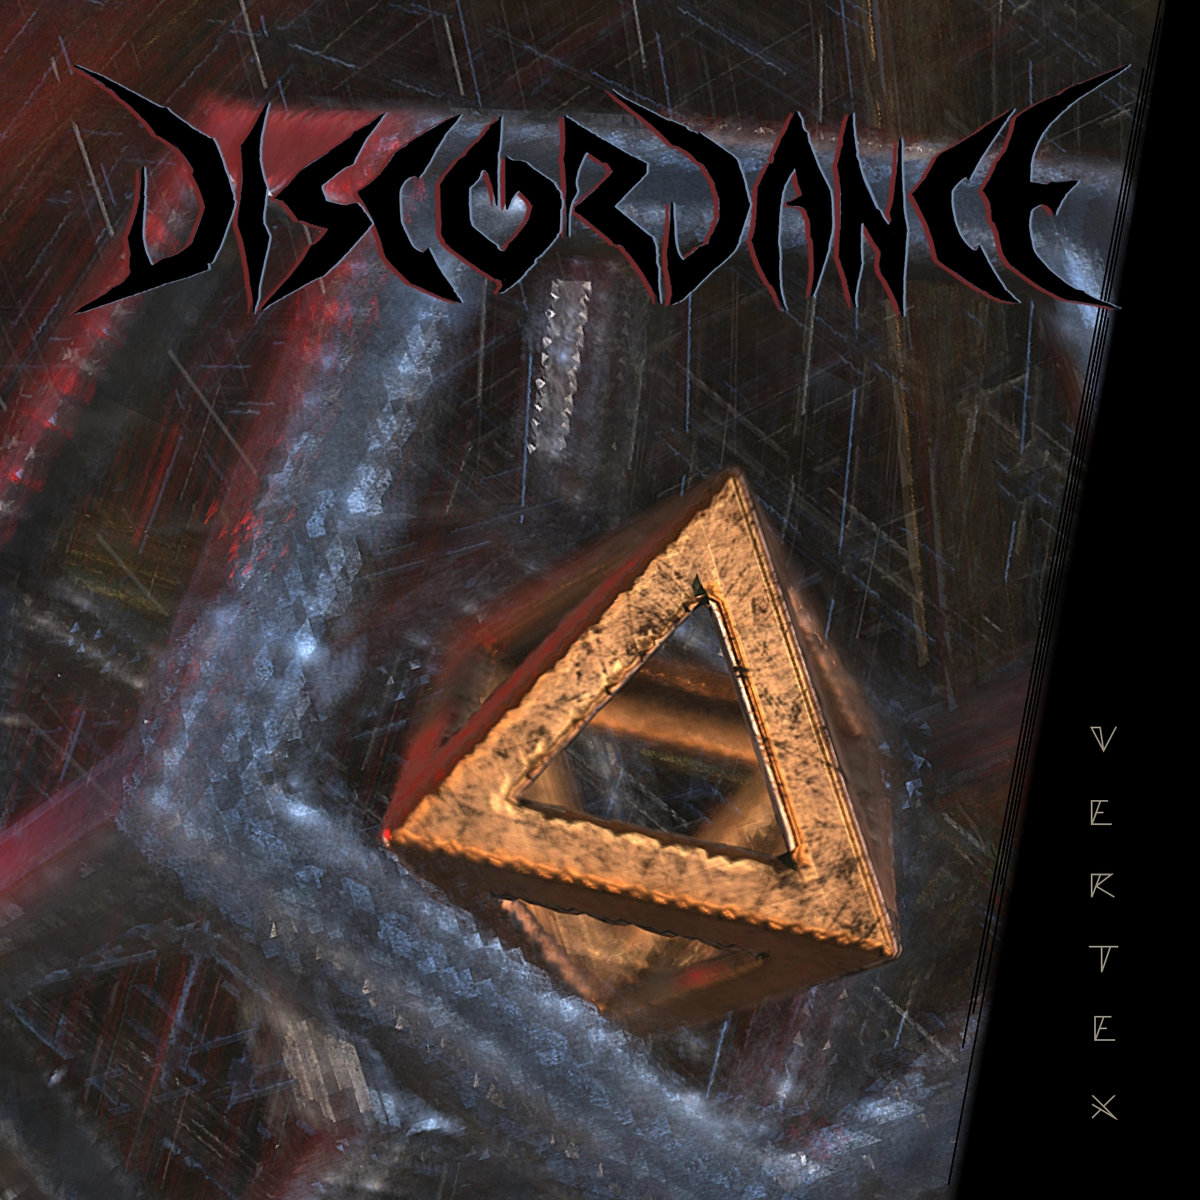 MUSIC EXTREME: DISCORDANCE RELEASE 